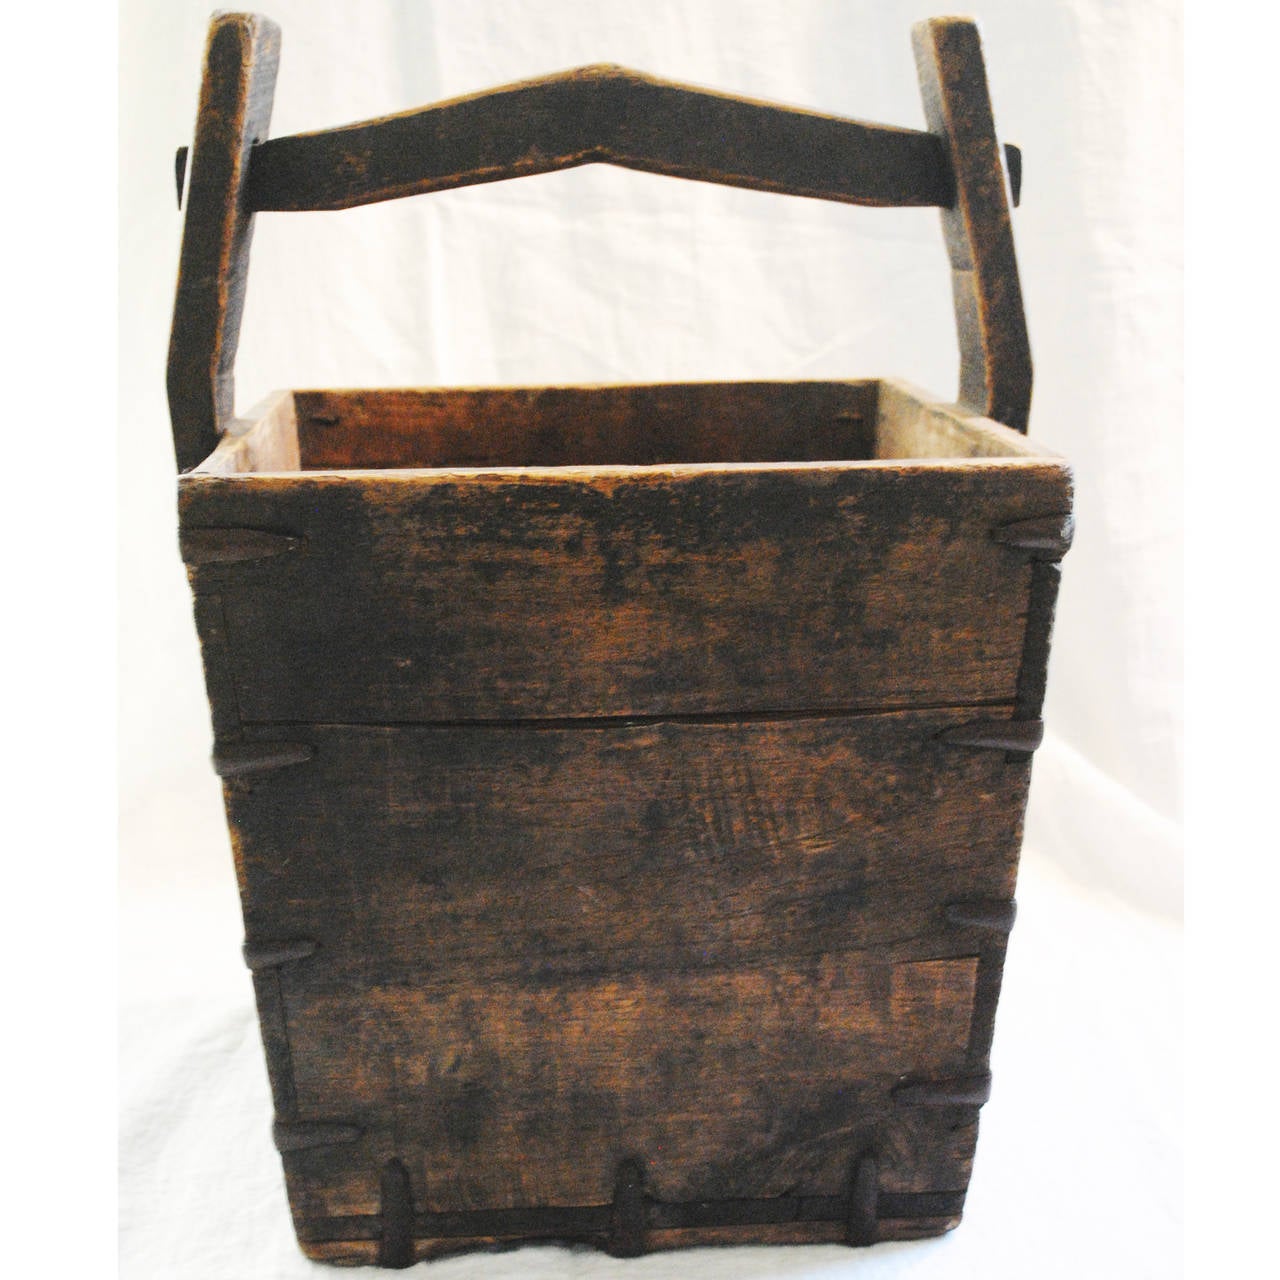 This antique carrier was used for transporting rice from fields in China for generations. Measure: 14 1/4